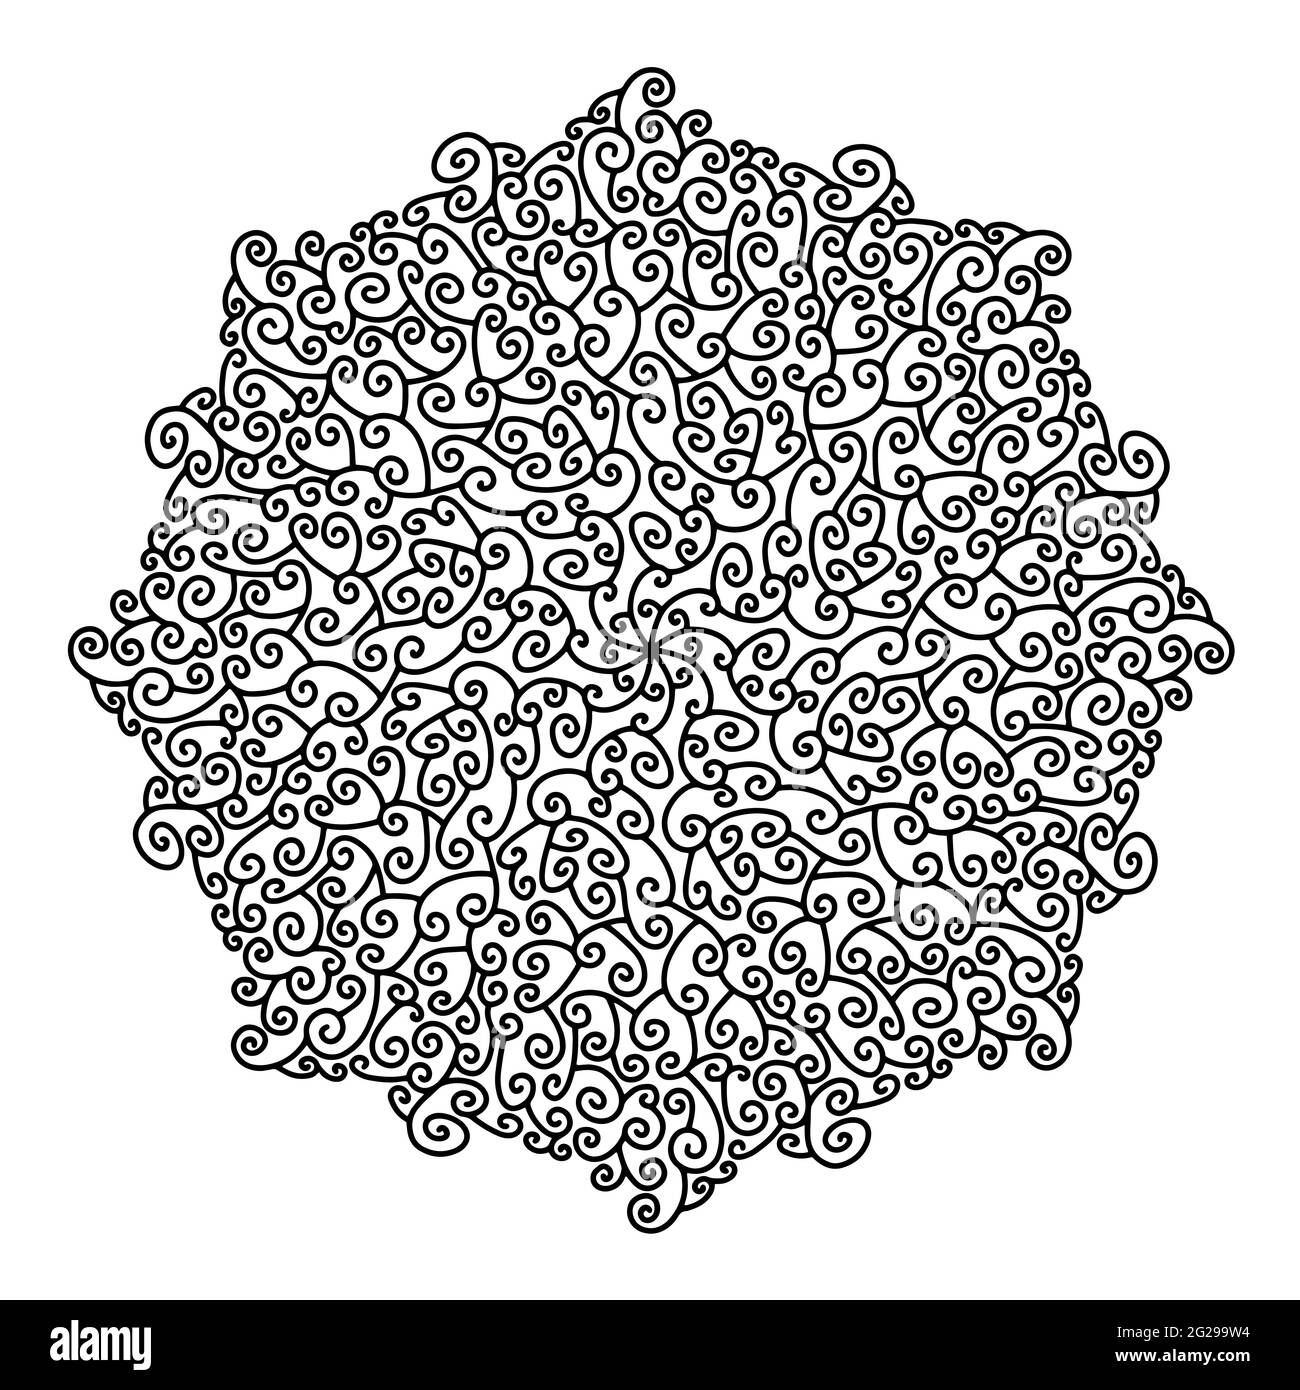 Outline round floral Mandala ornament on white background. Circular spiral pattern for tattoo, wedding decor, henna mehndi, coloring book page, print, Stock Vector